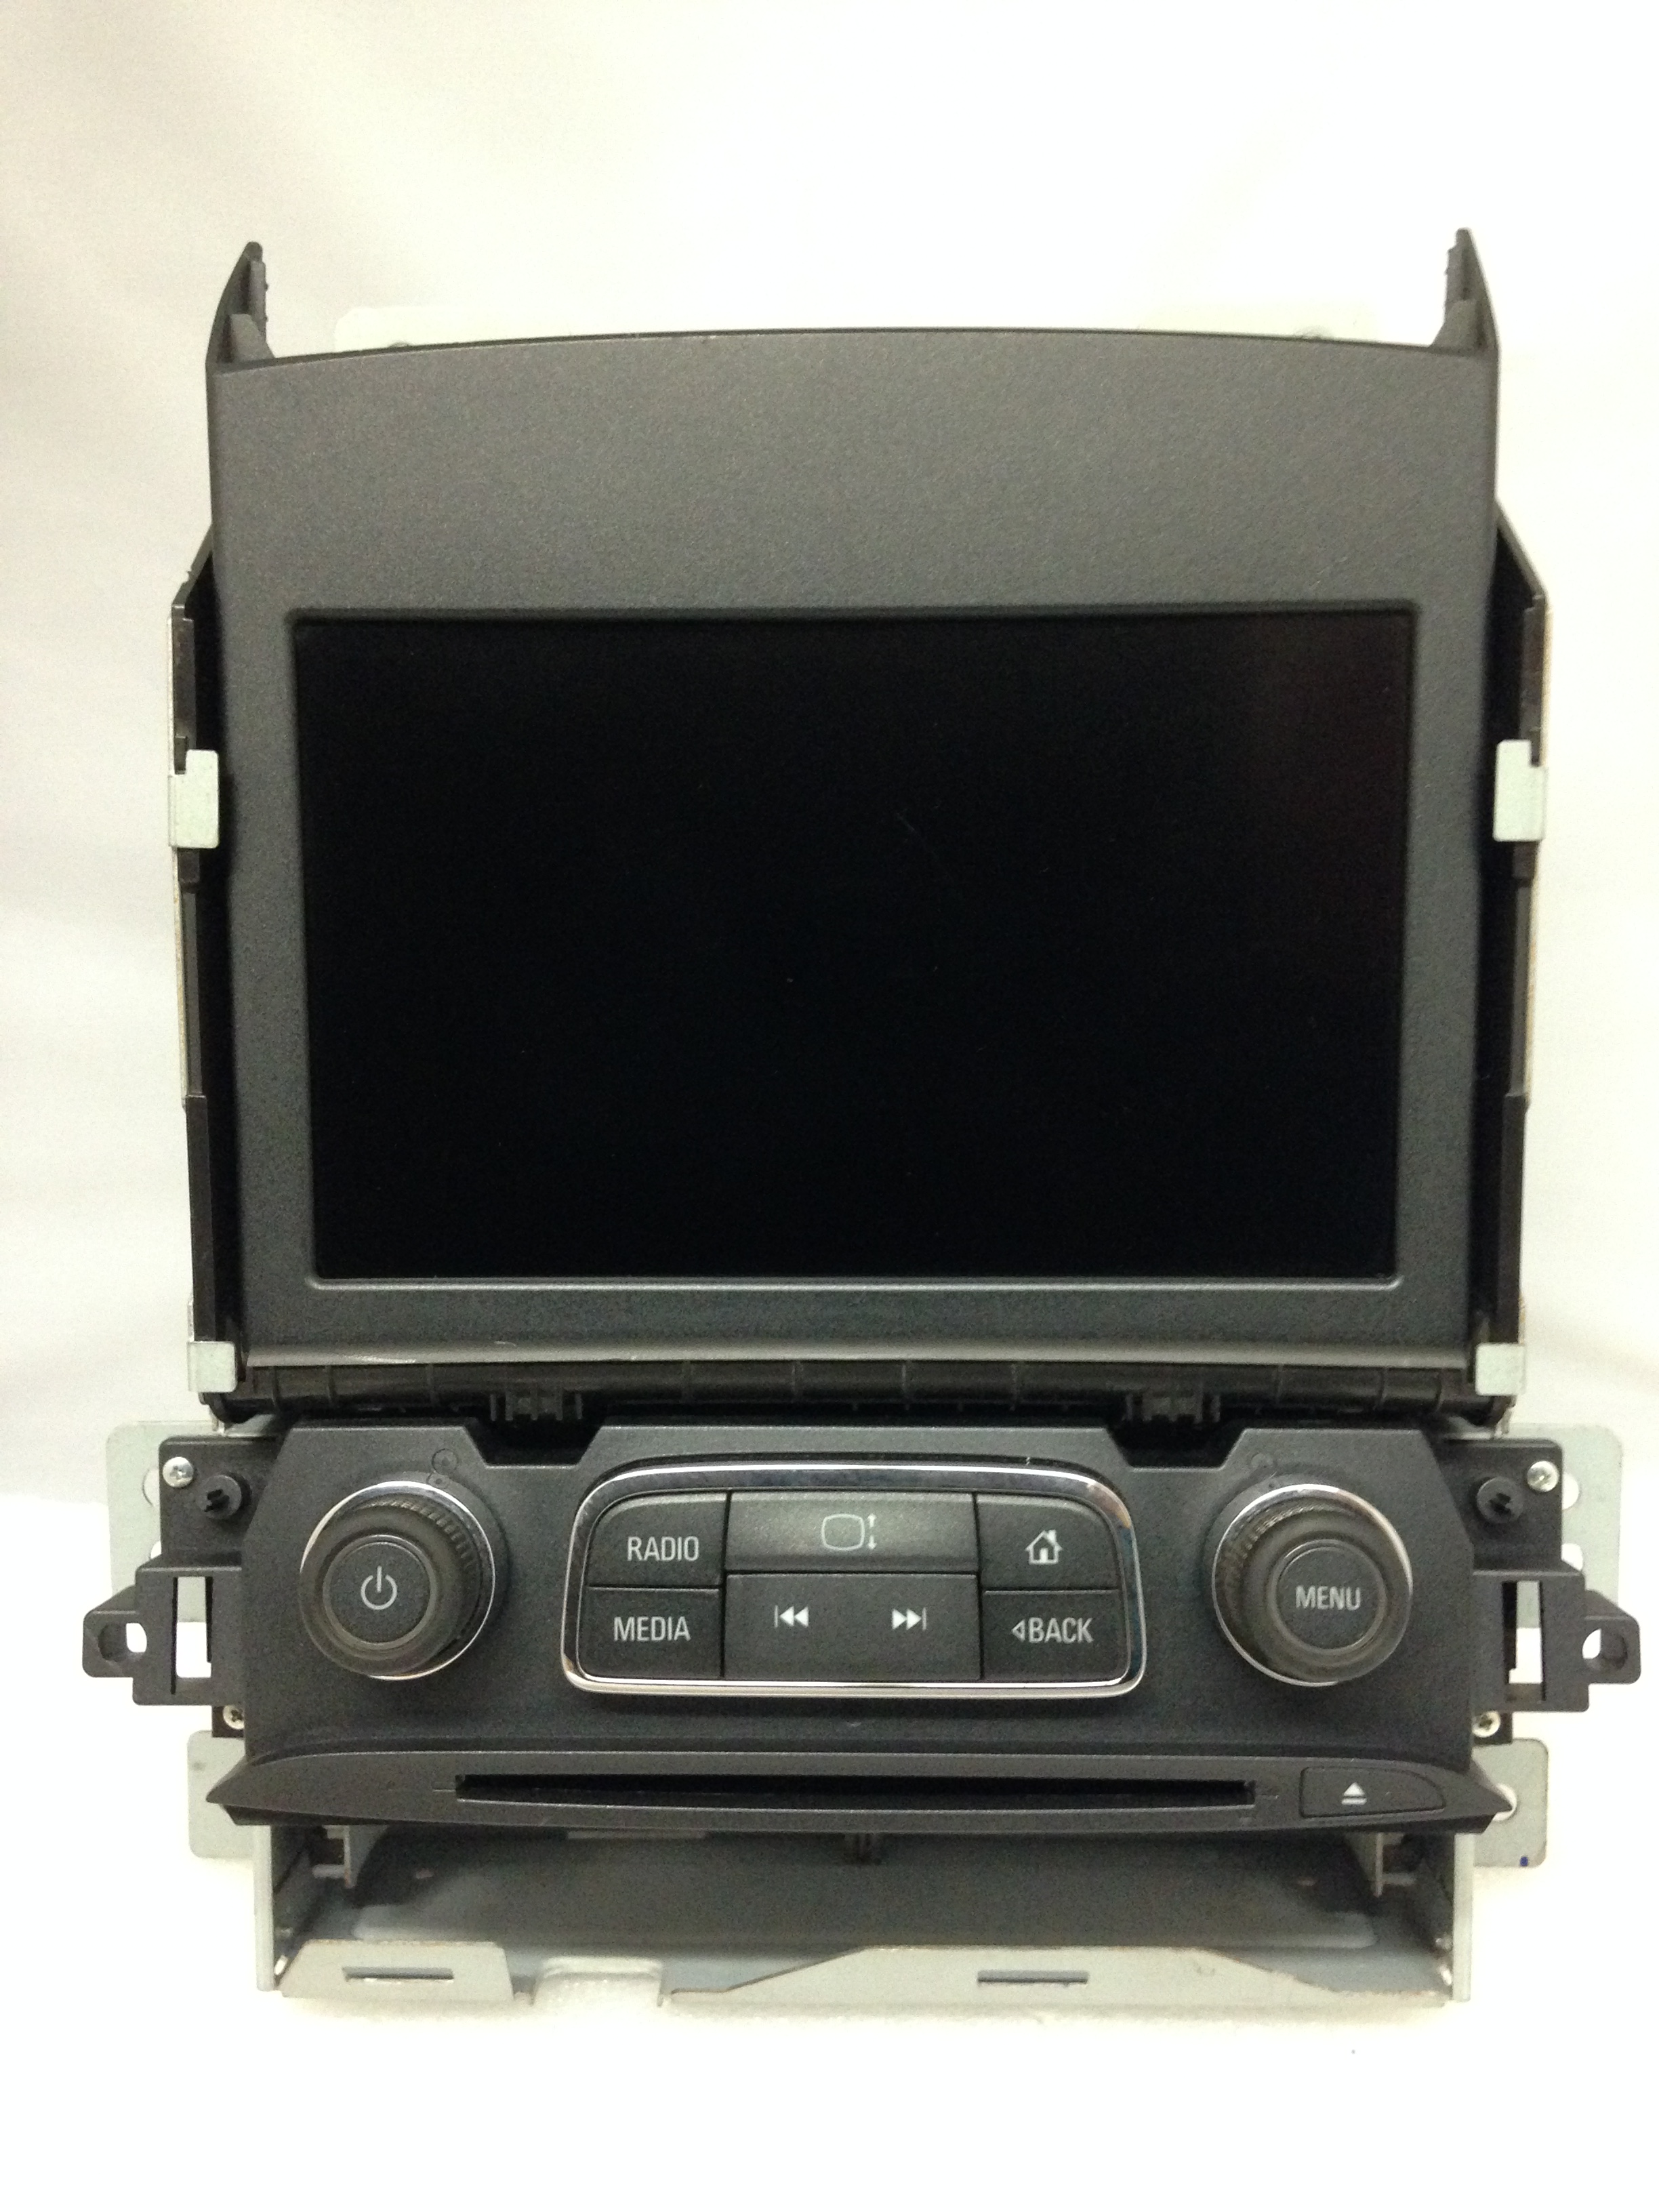 Impala 2014+ radio information display touch screen for parts